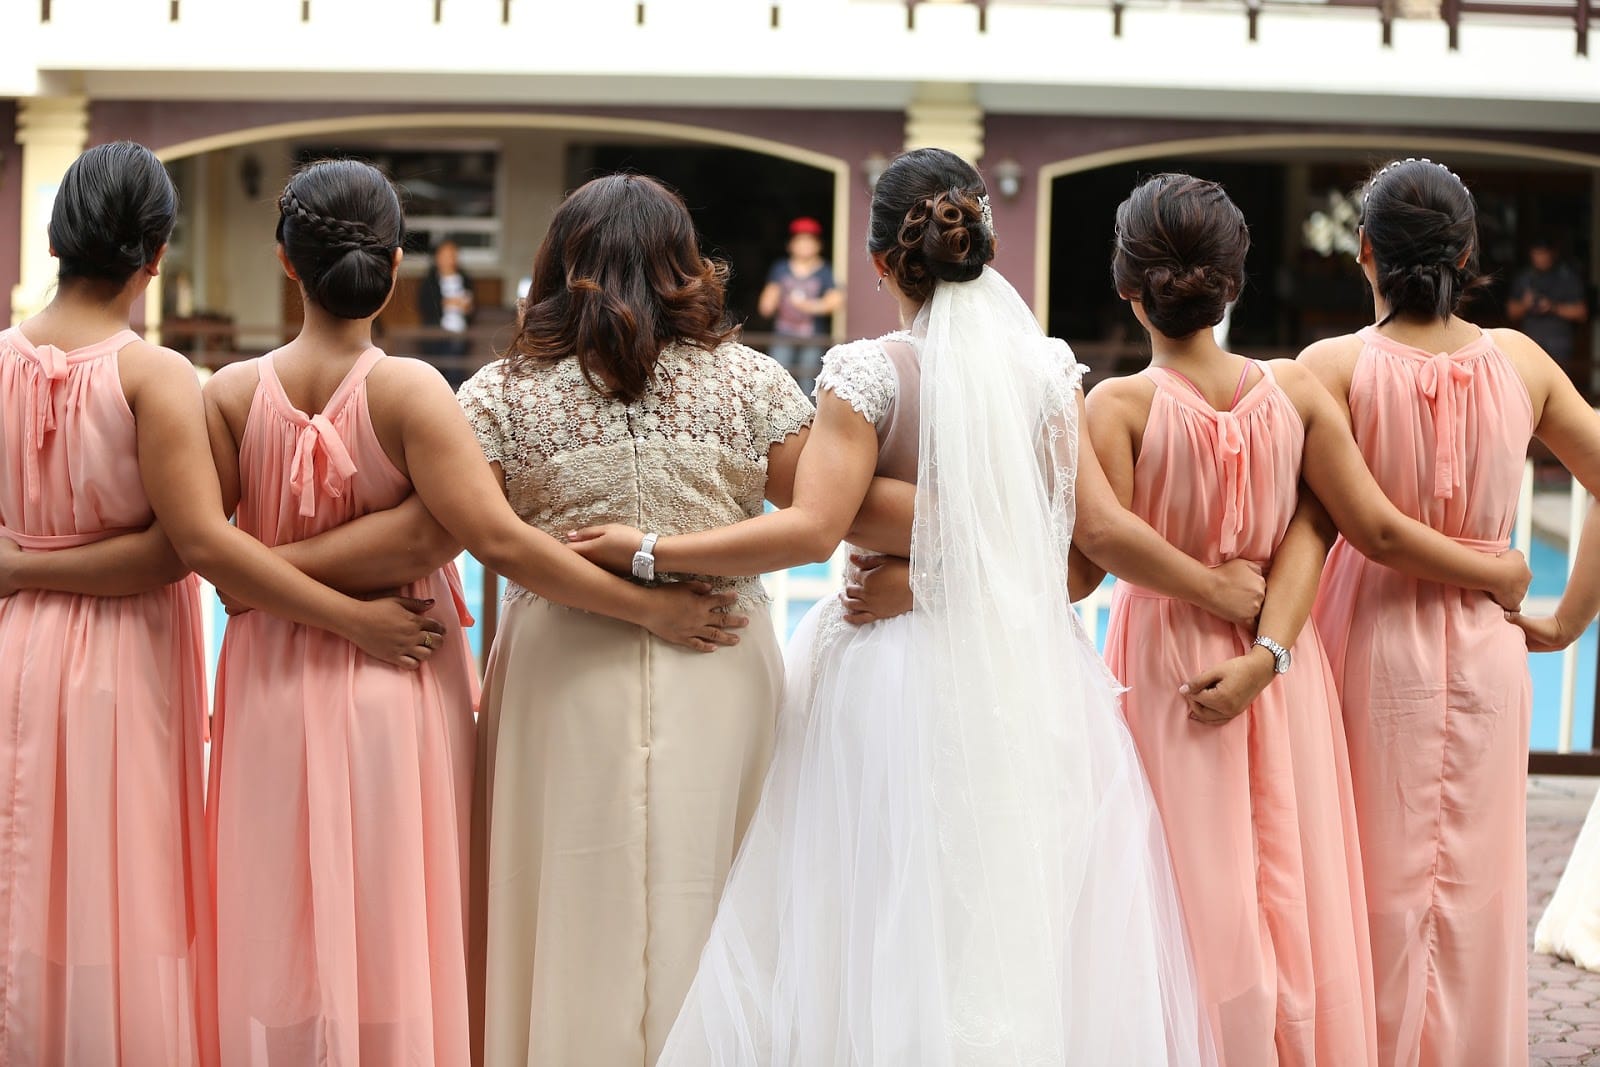 20 Bridesmaid Hairstyles for Every Type of Wedding - Joy